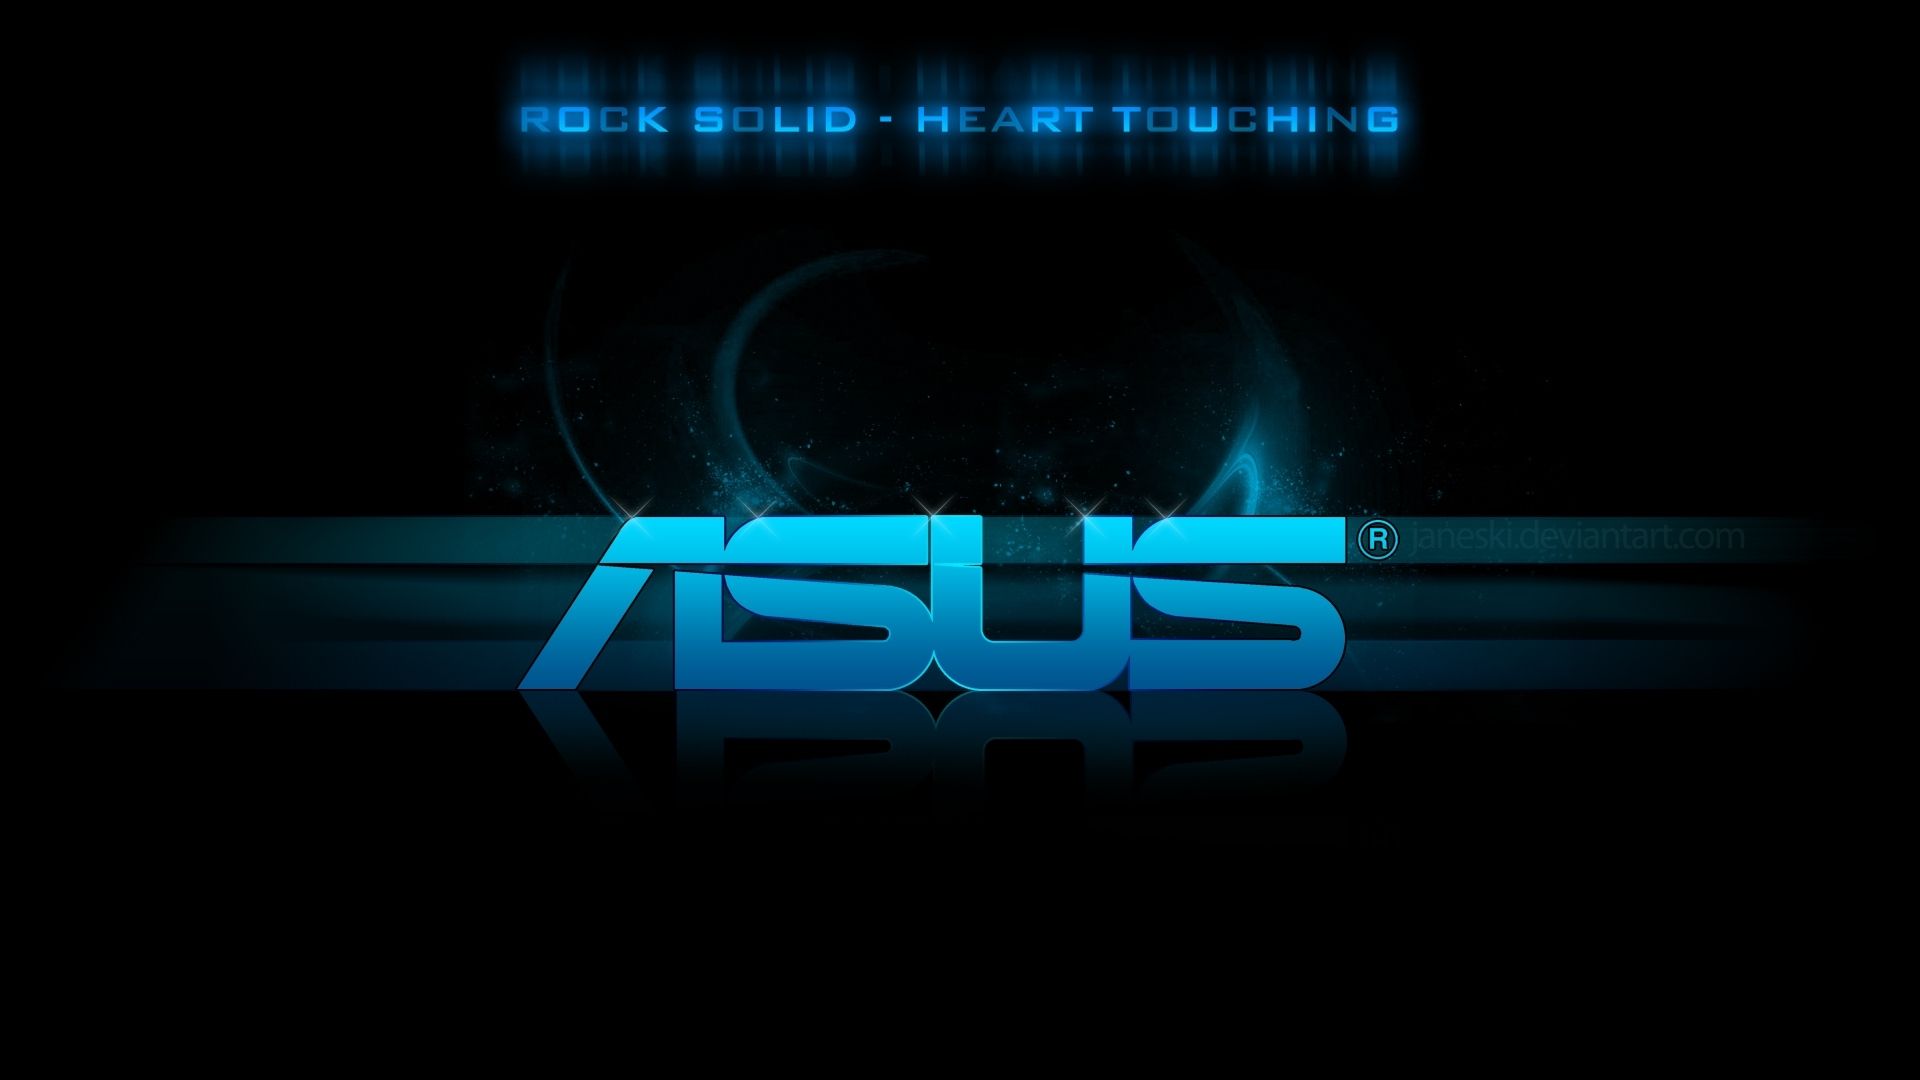 Asus 4K wallpaper for your desktop or mobile screen free and easy